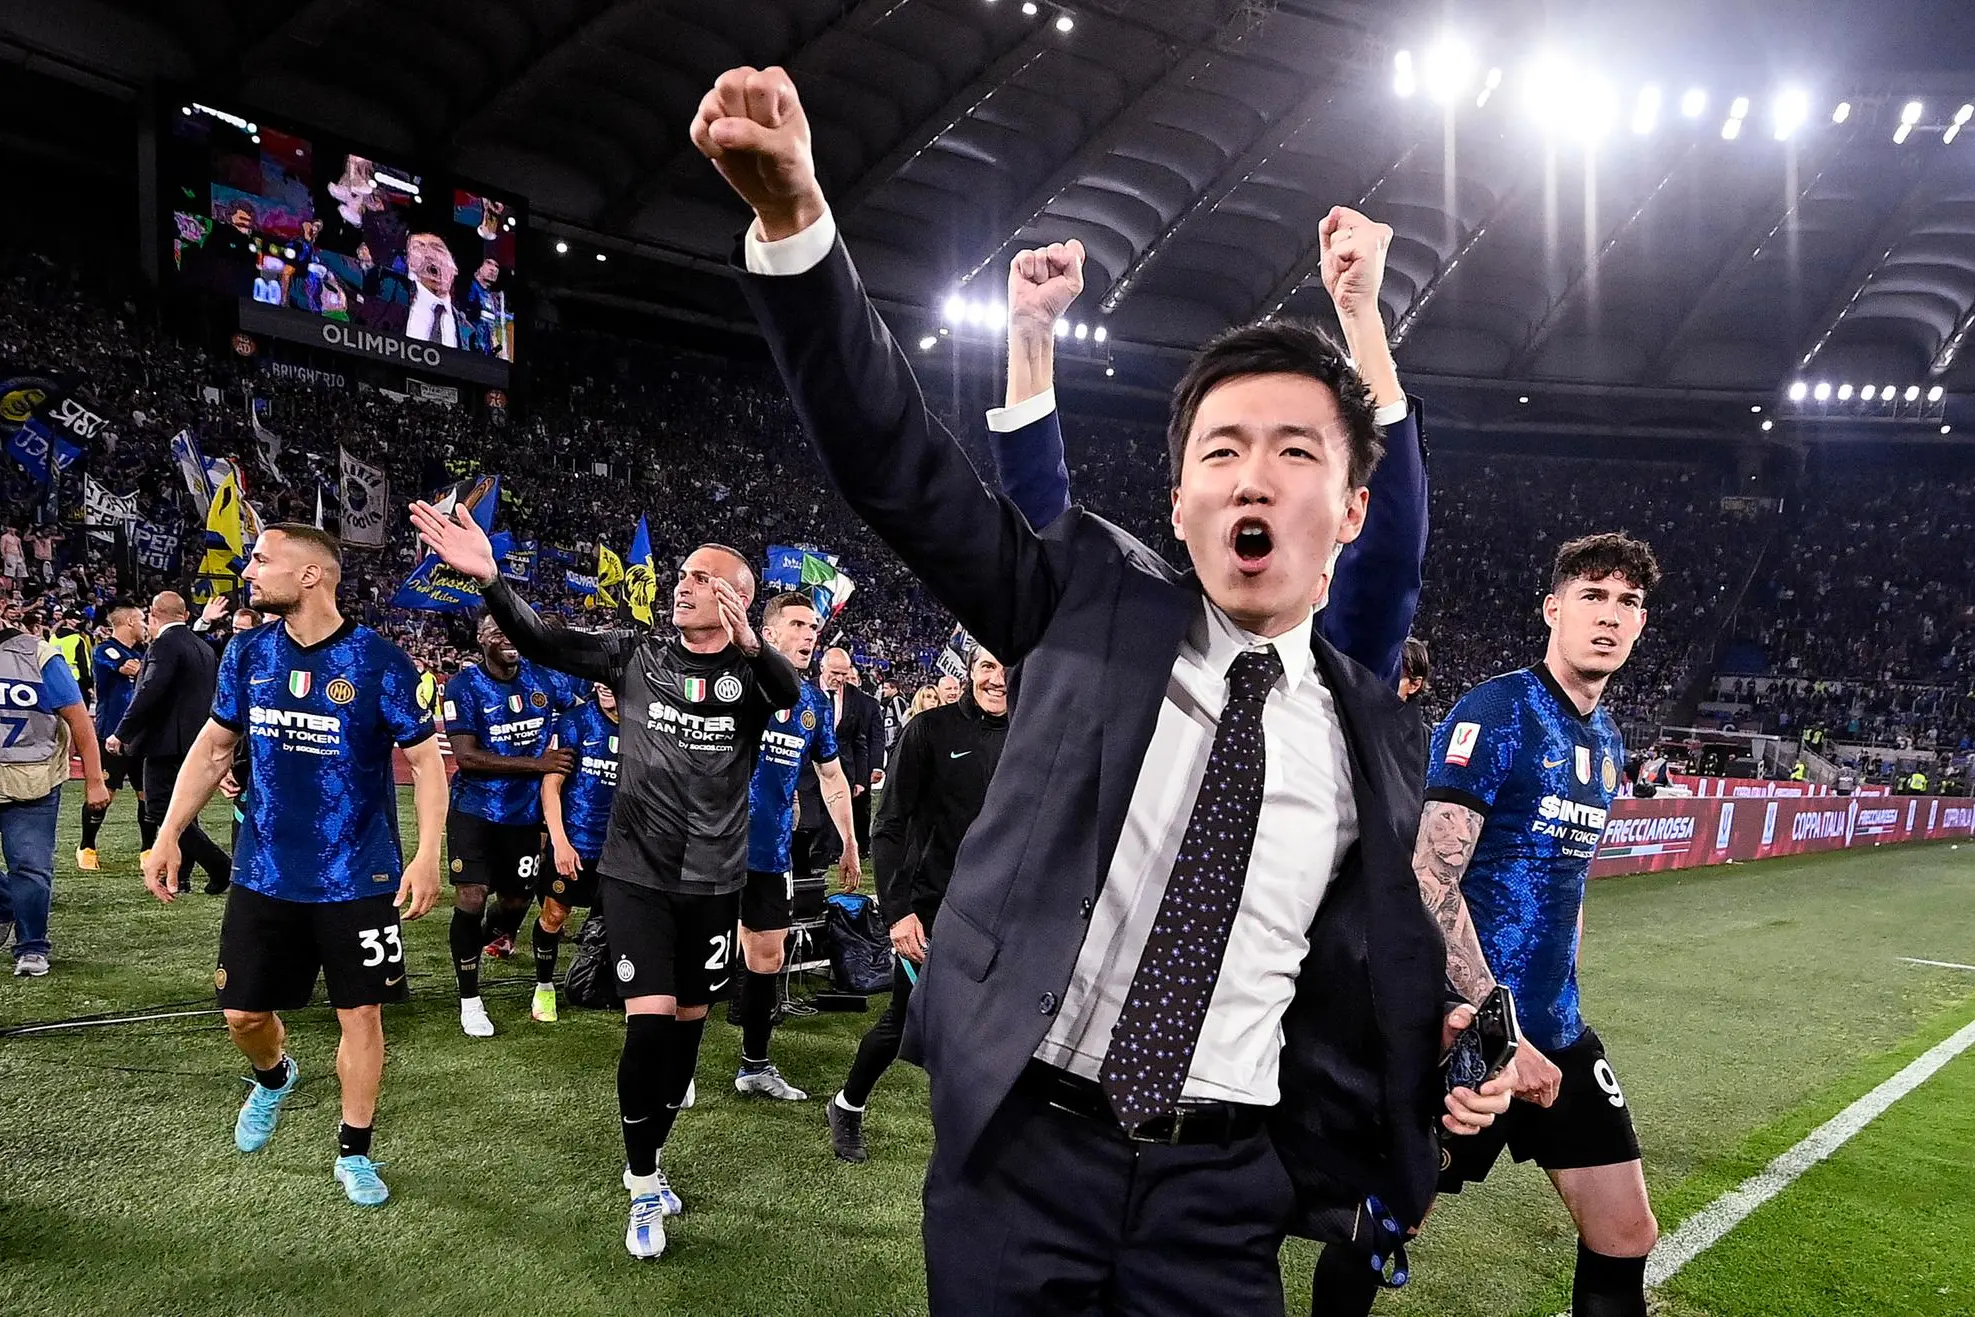 Inter's president Steven Zhang celebrates after winning the Coppa Italia Final soccer match between Juventus FC and FC Inter at the Olimpico stadium in Rome, Italy, 11 May 2022. ANSA/RICCARDO ANTIMIANI